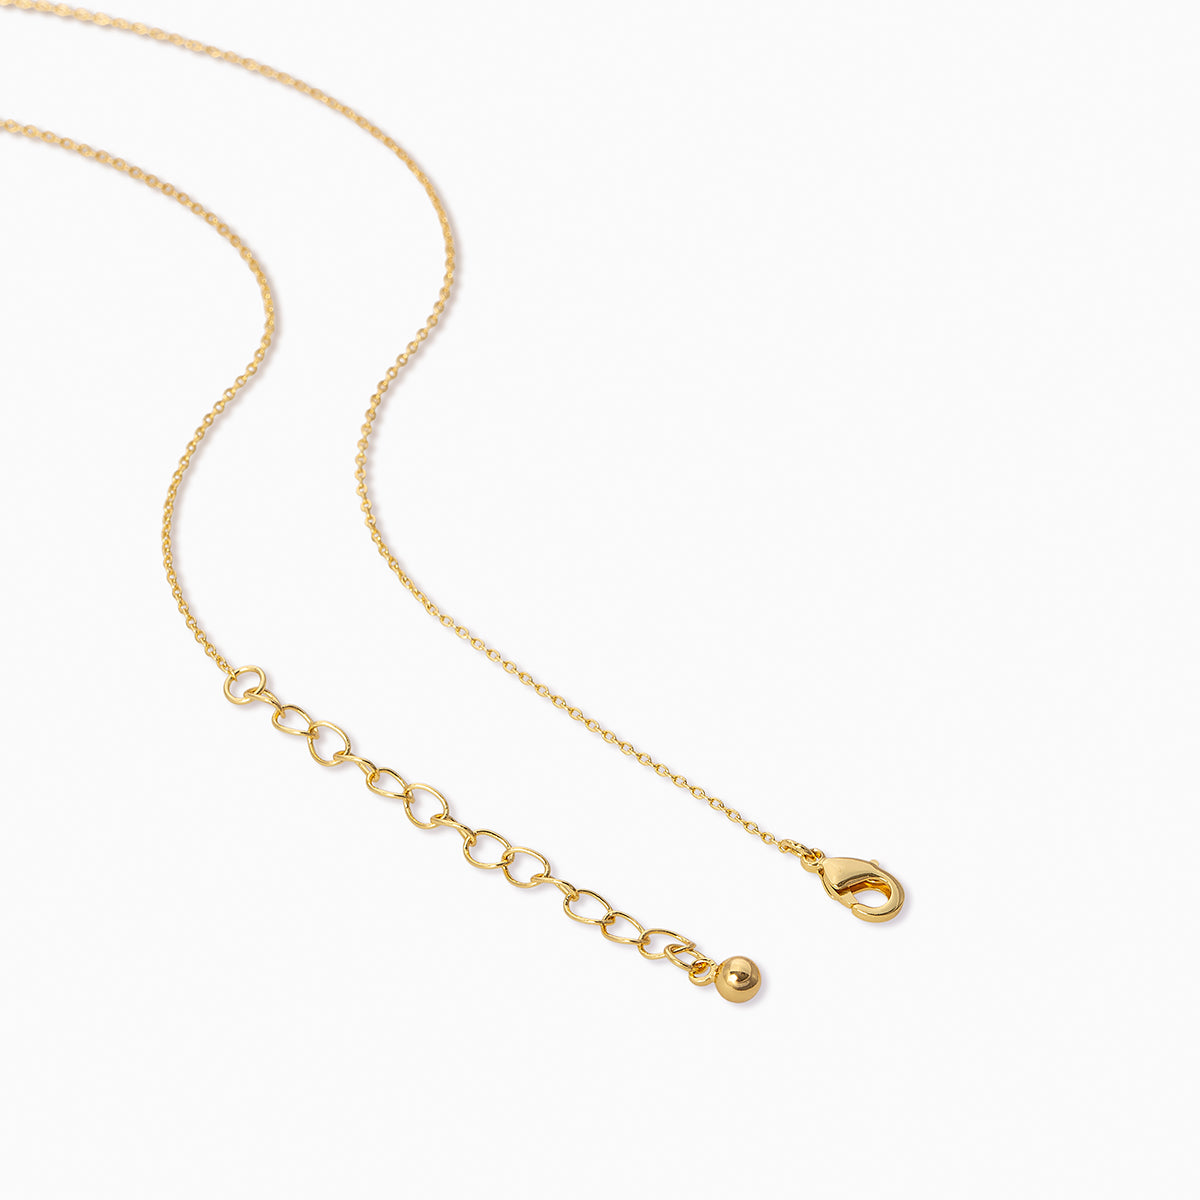 Little Things Lariat Necklace | Product Detail Image 2 | Uncommon James